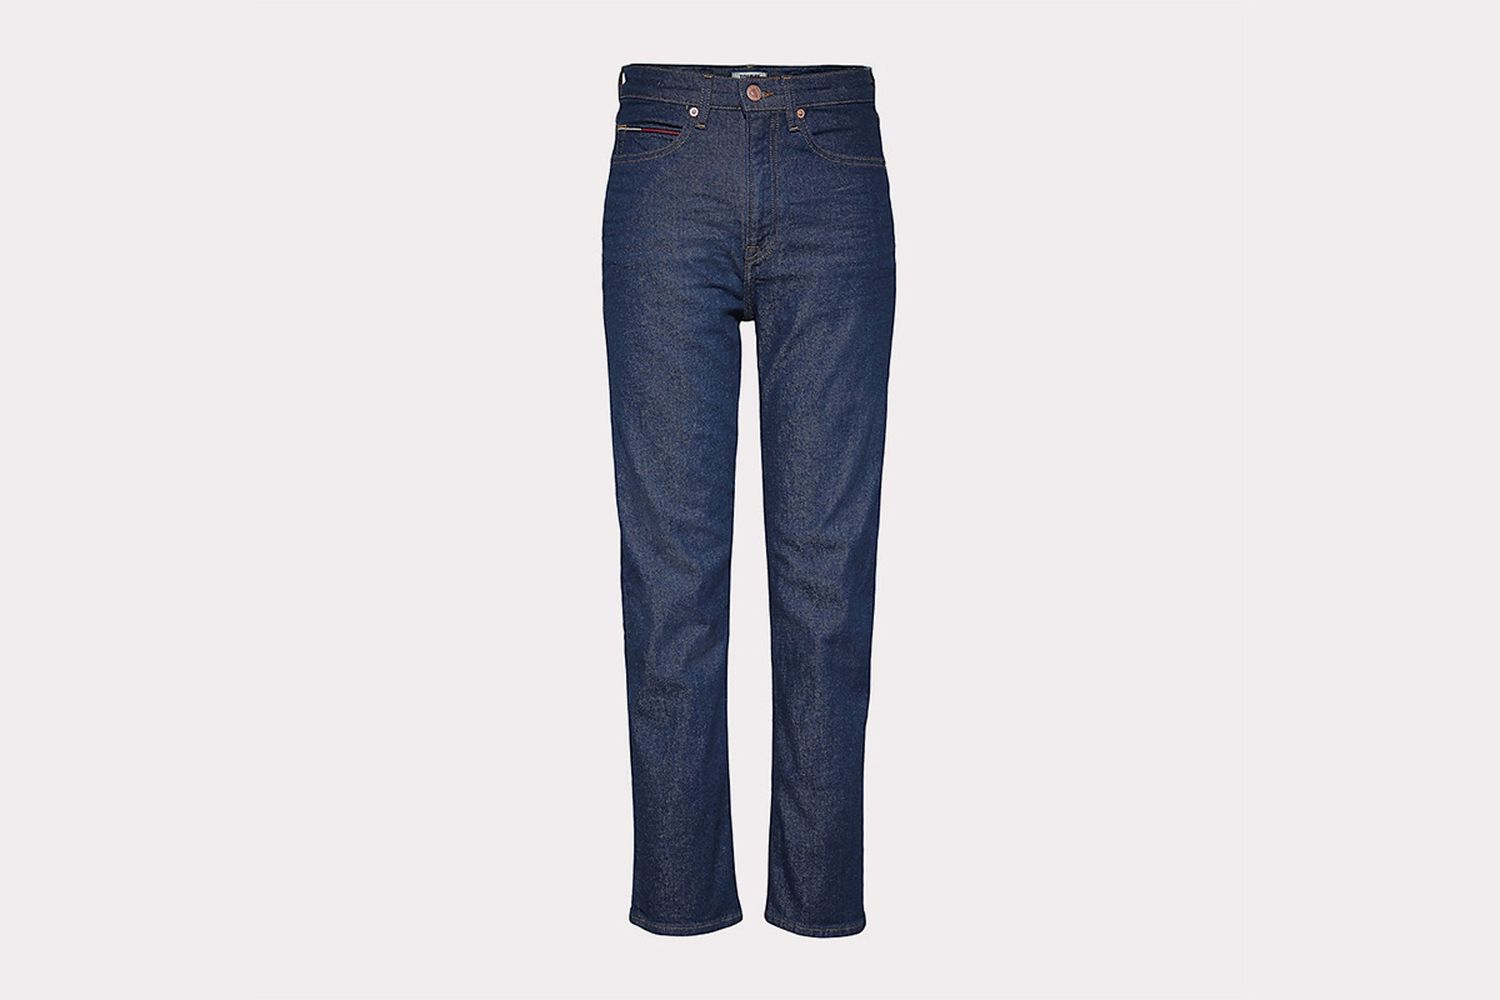 TJ 1990 Straight Fit Jeans